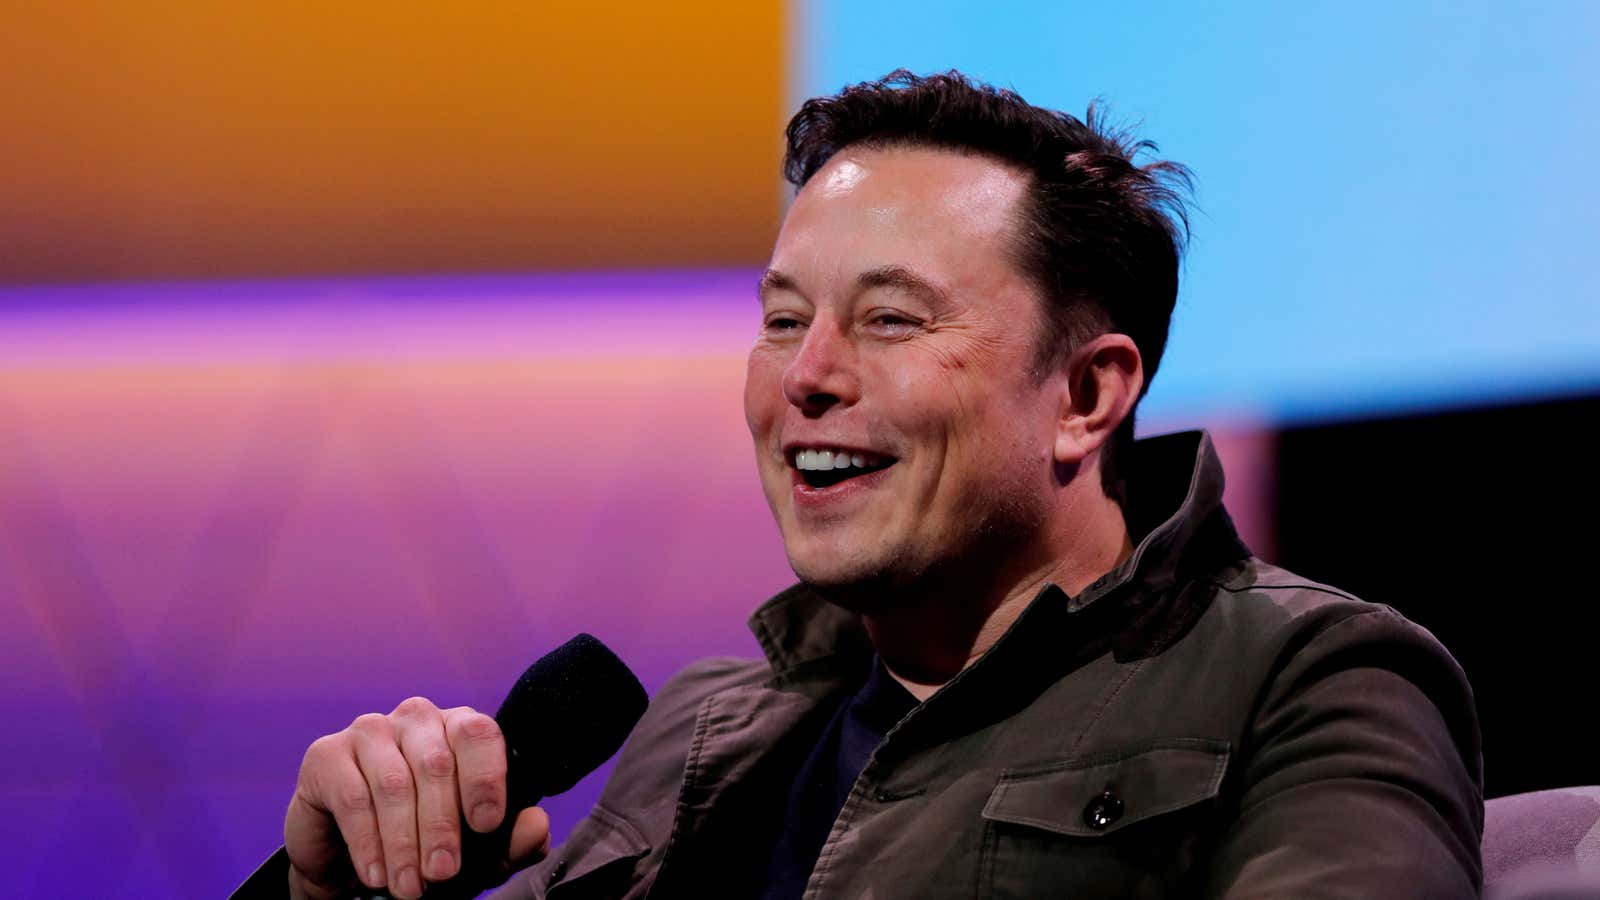 FILE PHOTO: Tesla CEO Elon Musk speaks during the E3 gaming convention in Los Angeles, California, U.S., June 13, 2019. REUTERS/Mike Blake/File Photo/File Photo